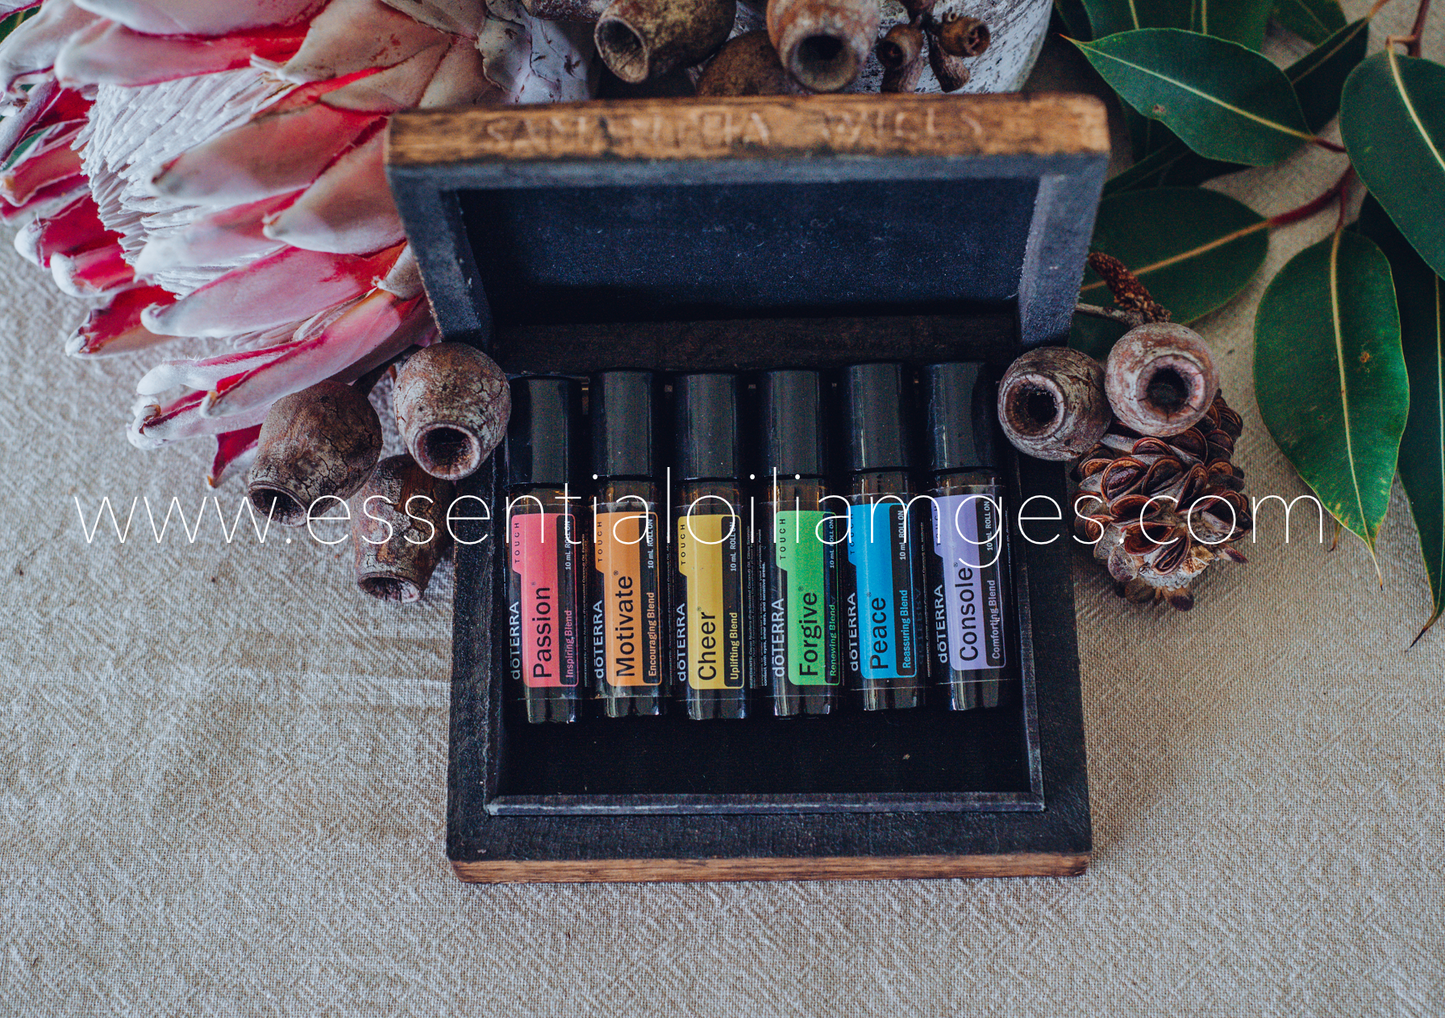 The Native Emotional Aromatherapy Touch Collection